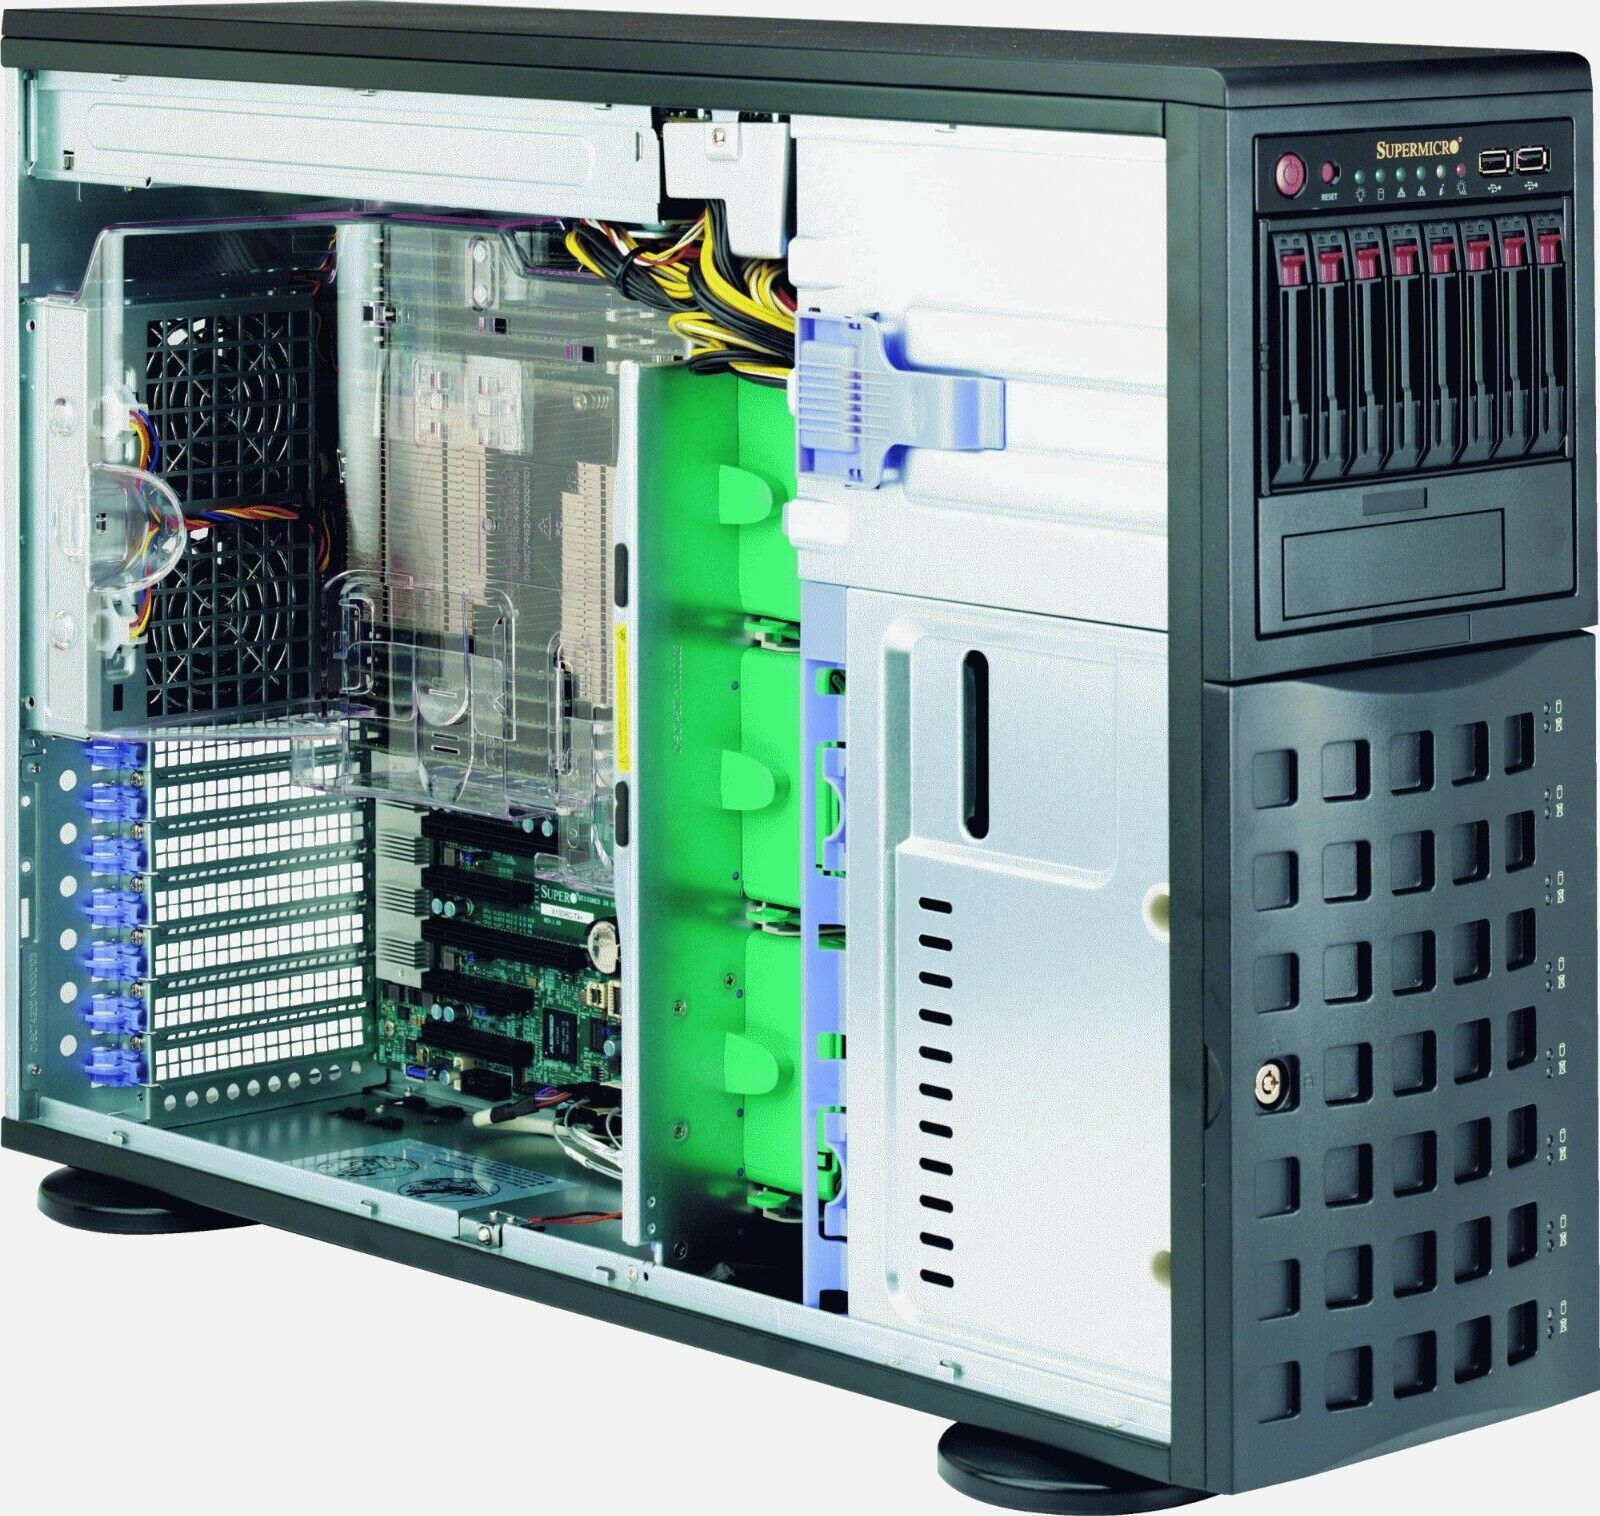 Supermicro SYS-7048R-C1RT Barebones Tower Server NEW IN BOX, IN STOCK